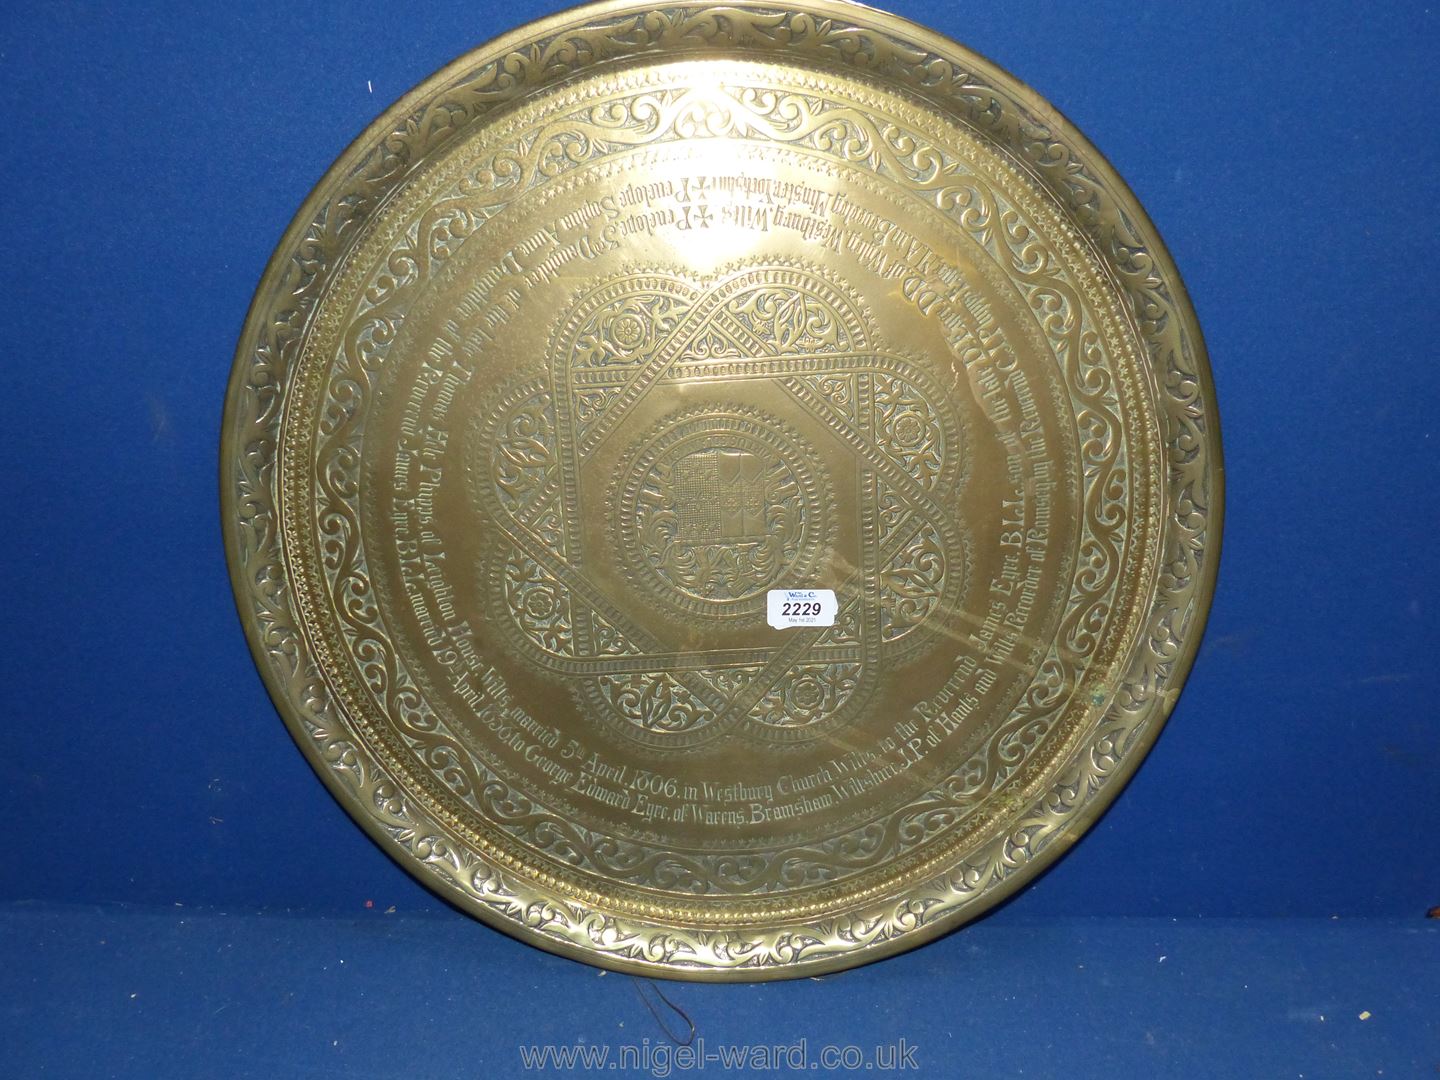 A large Brass Tray commemorating the Marriage of Penelope Sophie Eyre and George on 19th April,